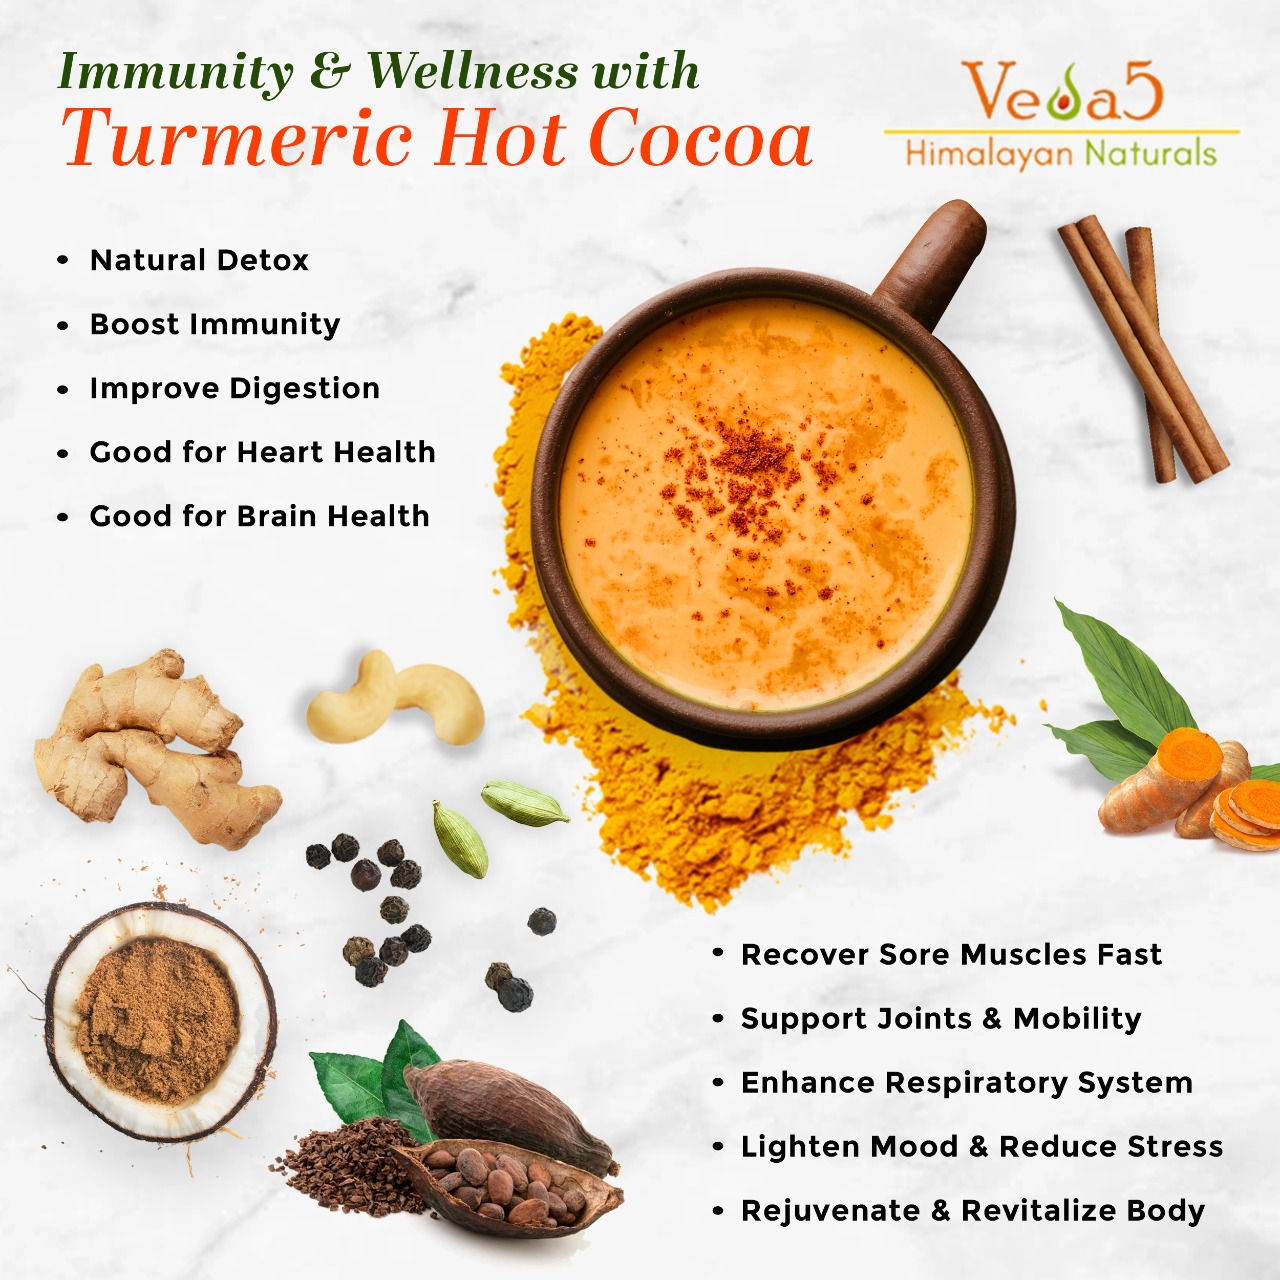 Turmeric Hot Cocoa Enriched with Coconut Sugar Benefits Veda5 Himalayan Naturals